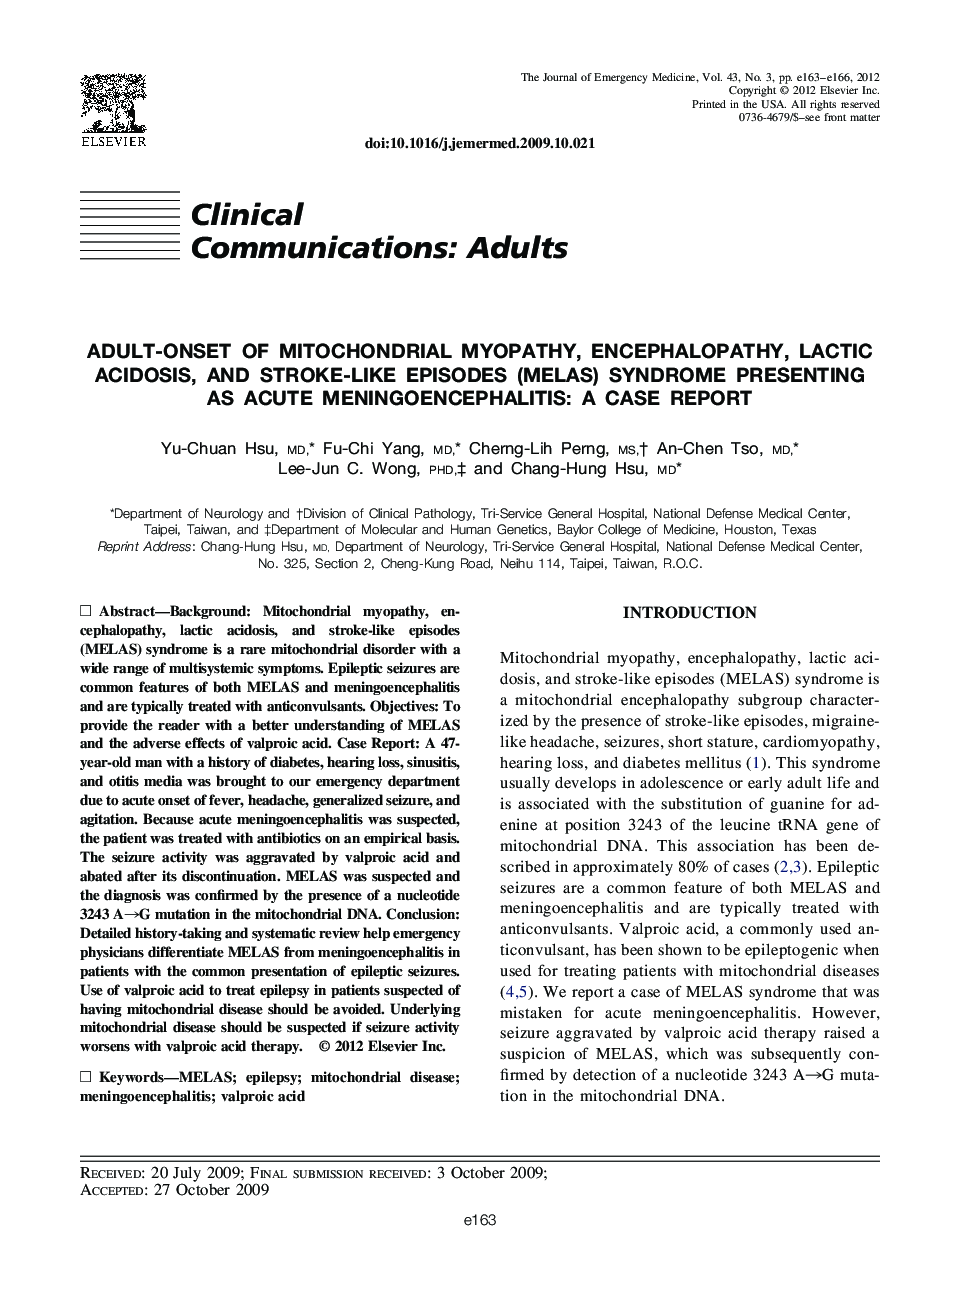 Adult-onset of Mitochondrial Myopathy, Encephalopathy, Lactic Acidosis, and Stroke-Like Episodes (MELAS) Syndrome Presenting as Acute Meningoencephalitis: A Case Report